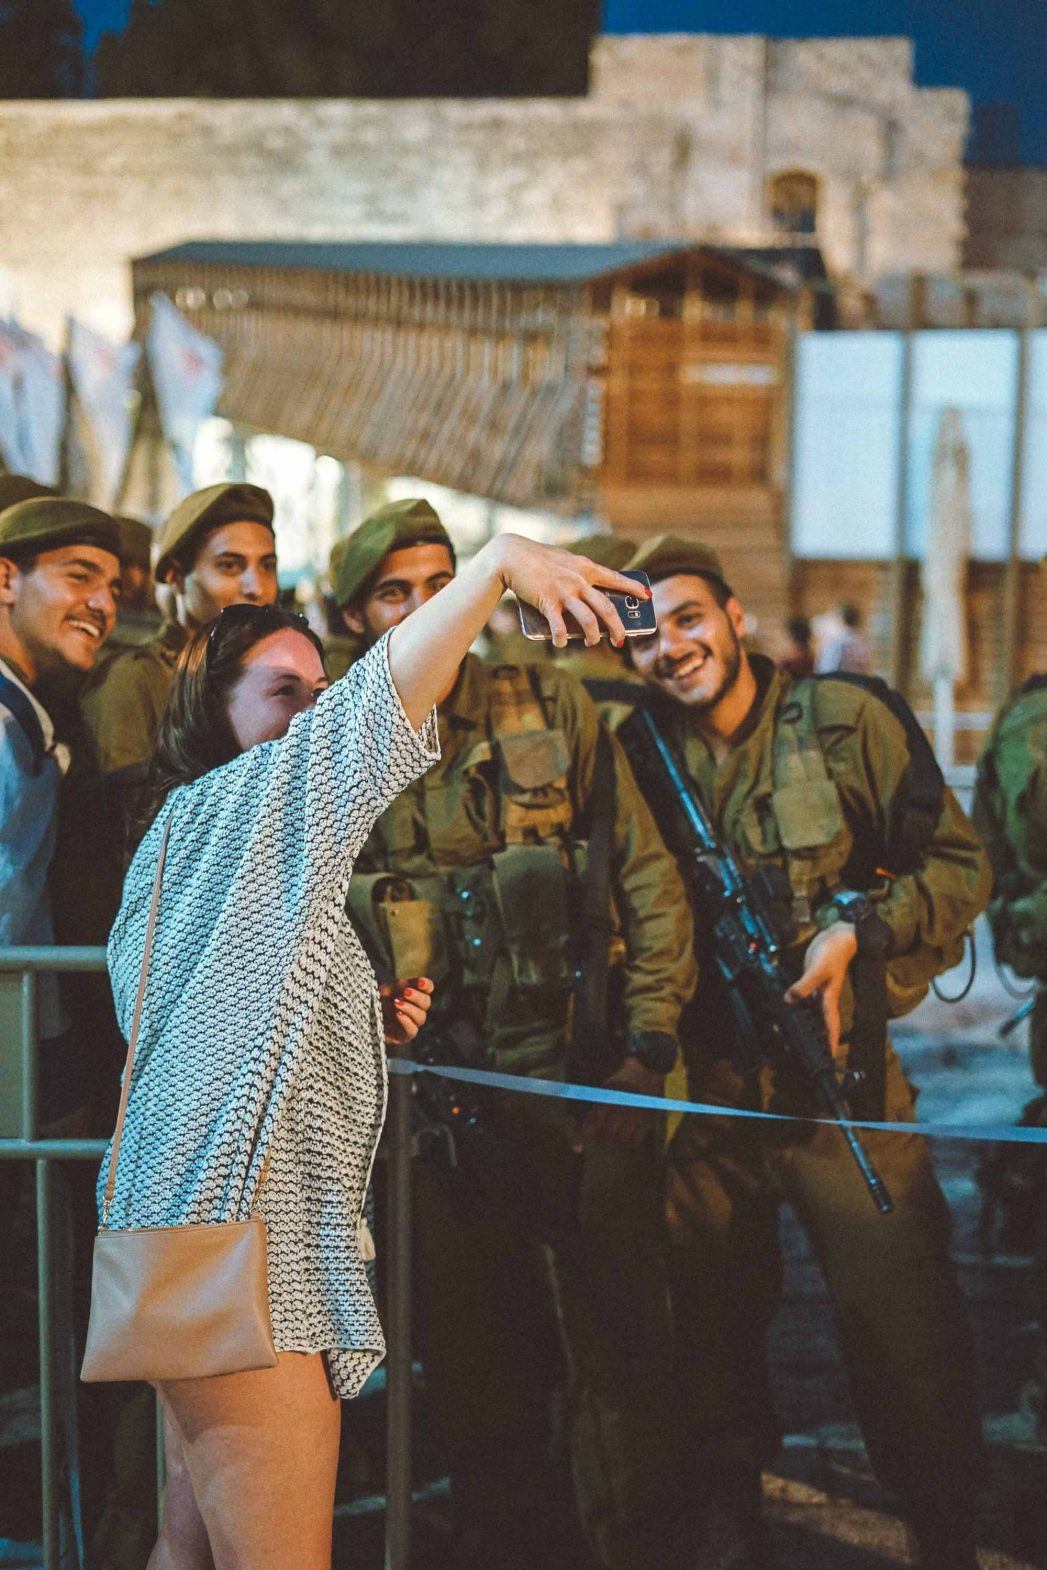 A tourist takes a selfie with soldiers.